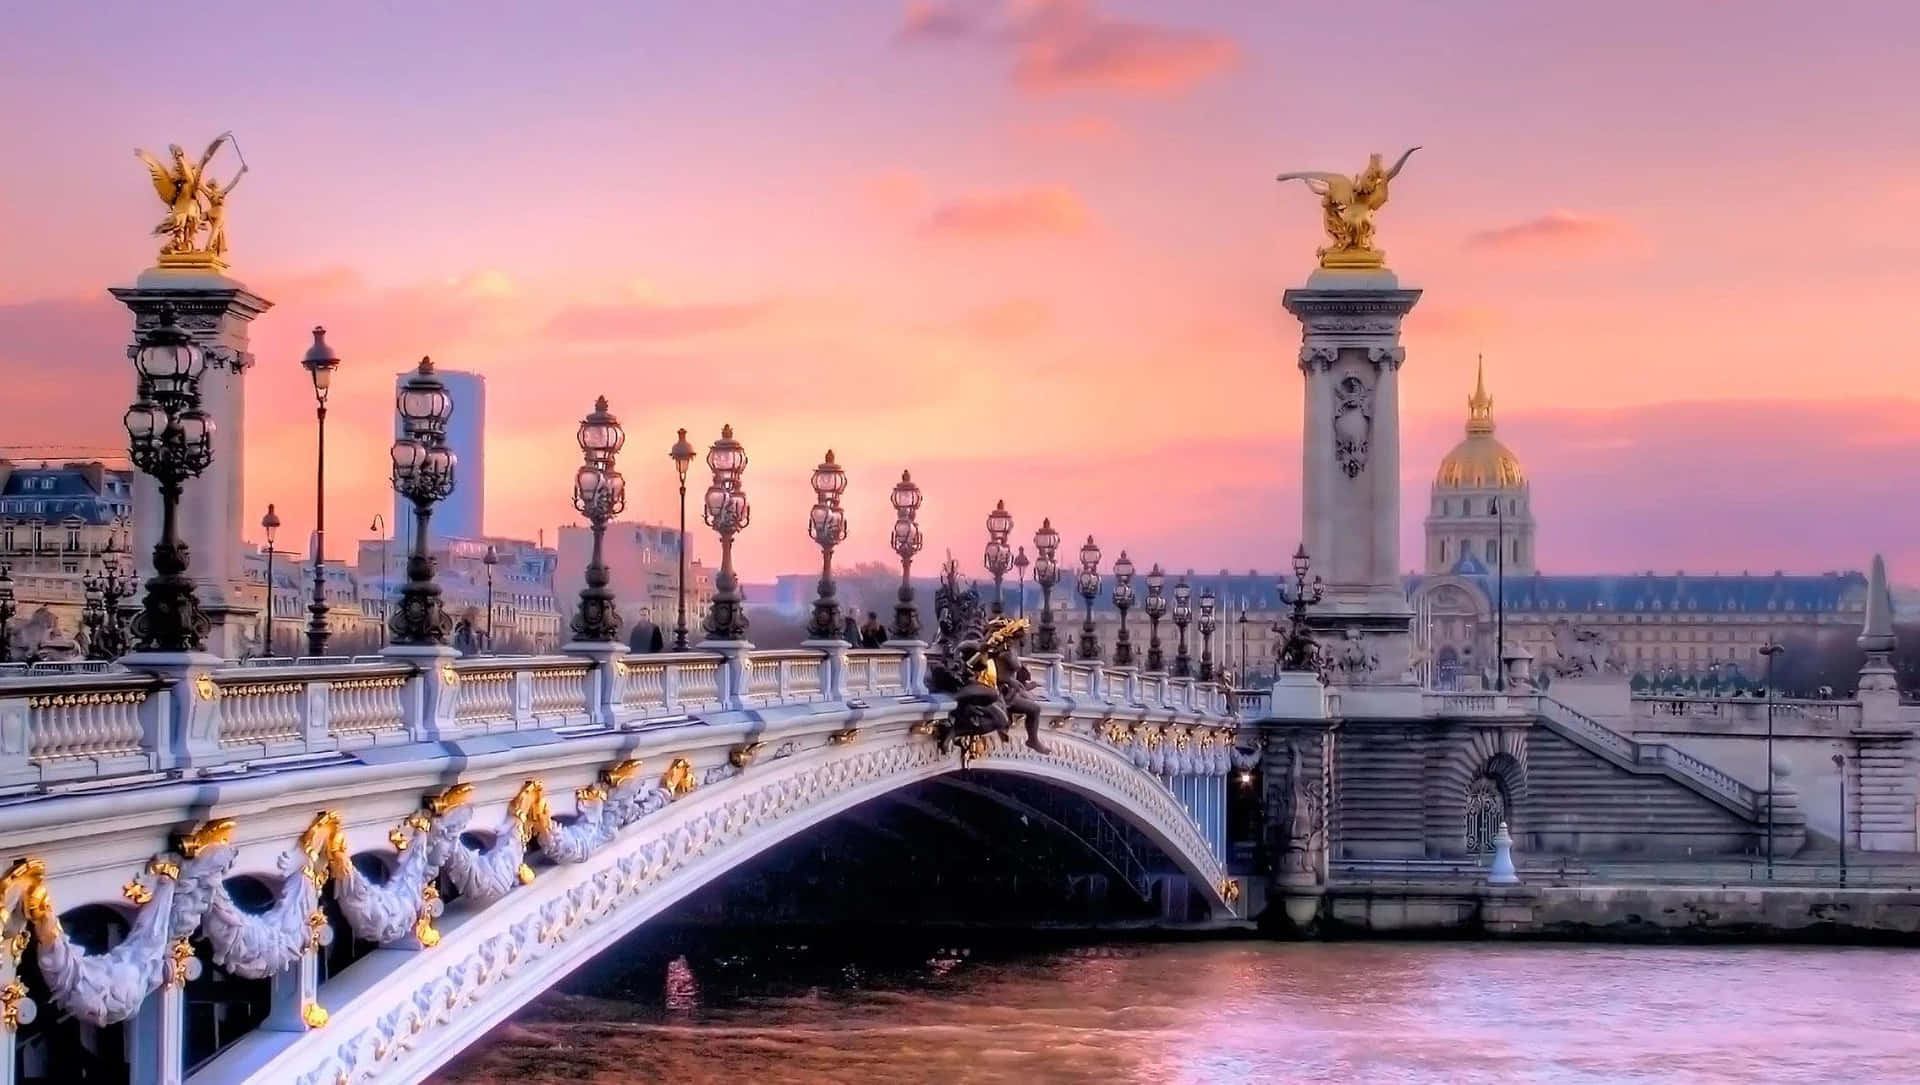 Paris At Sunset With A Bridge And Statues